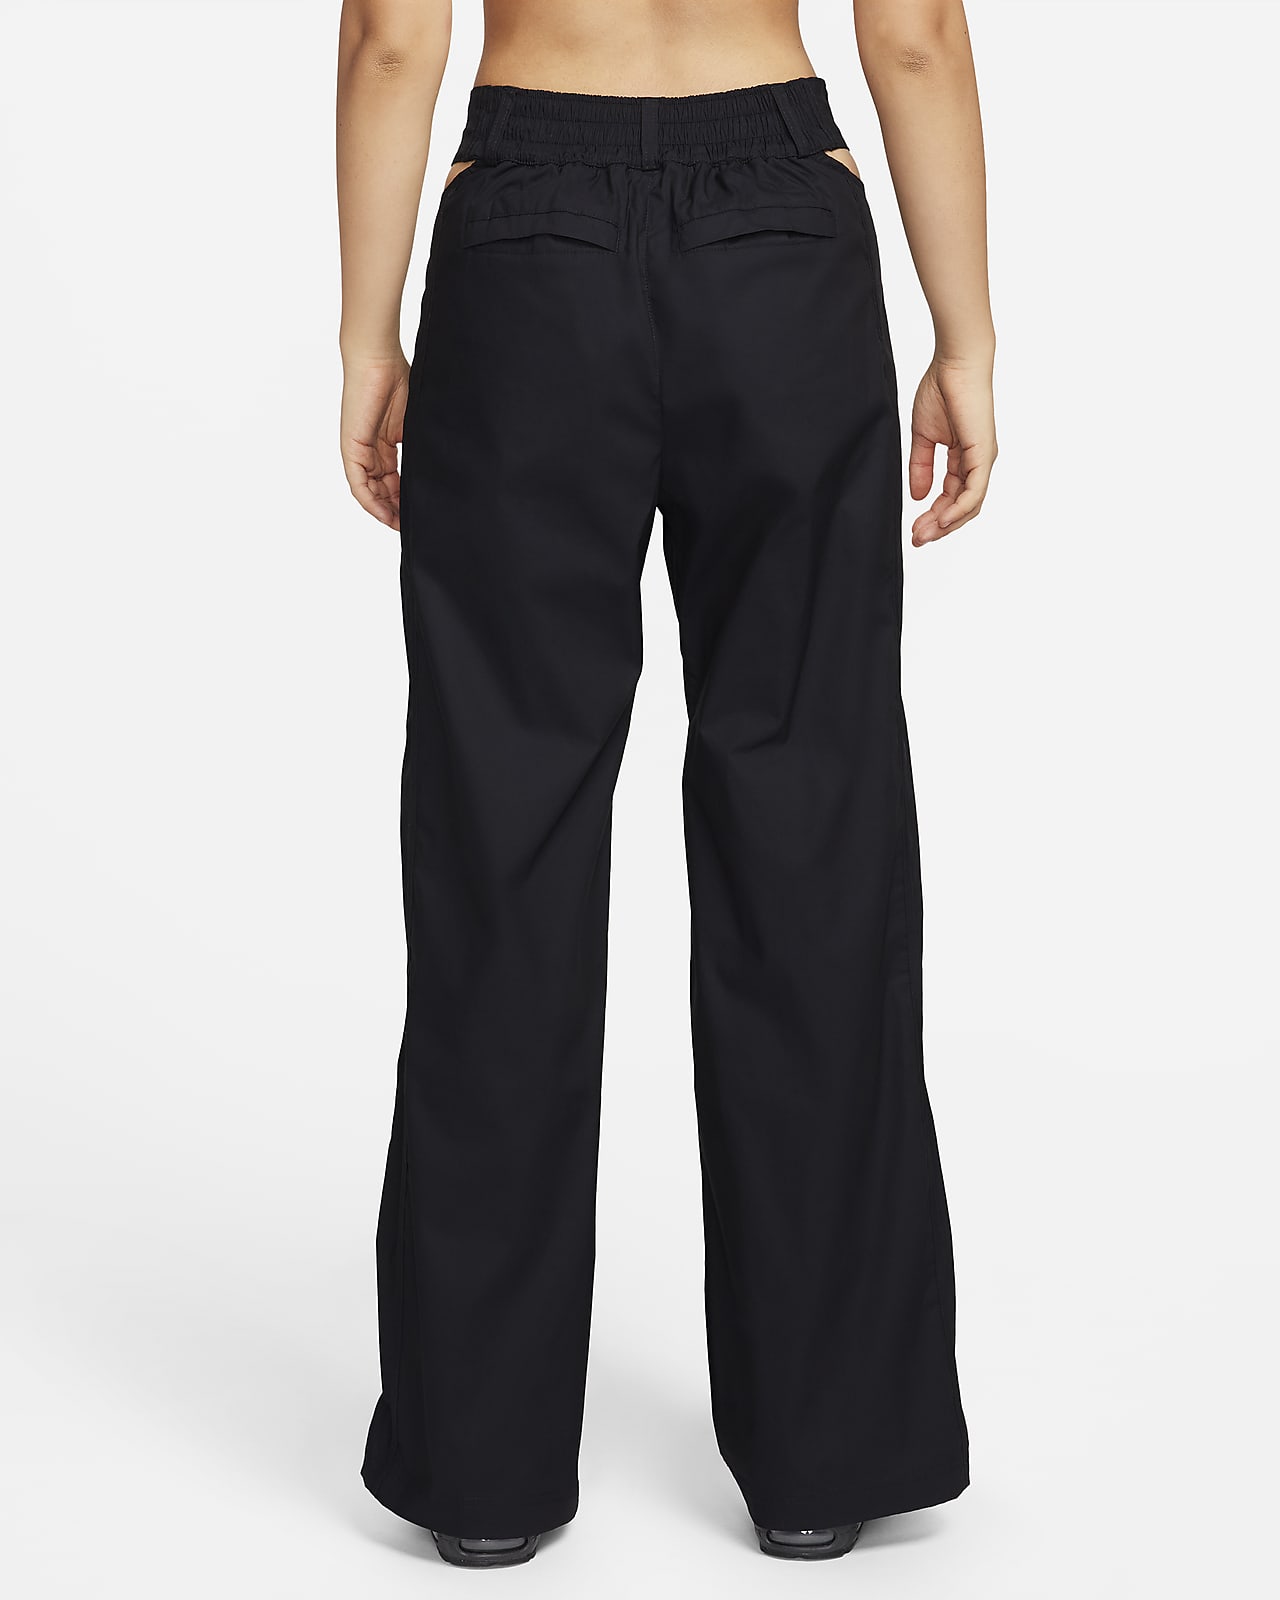 Women's Trousers & Tights. Nike CA